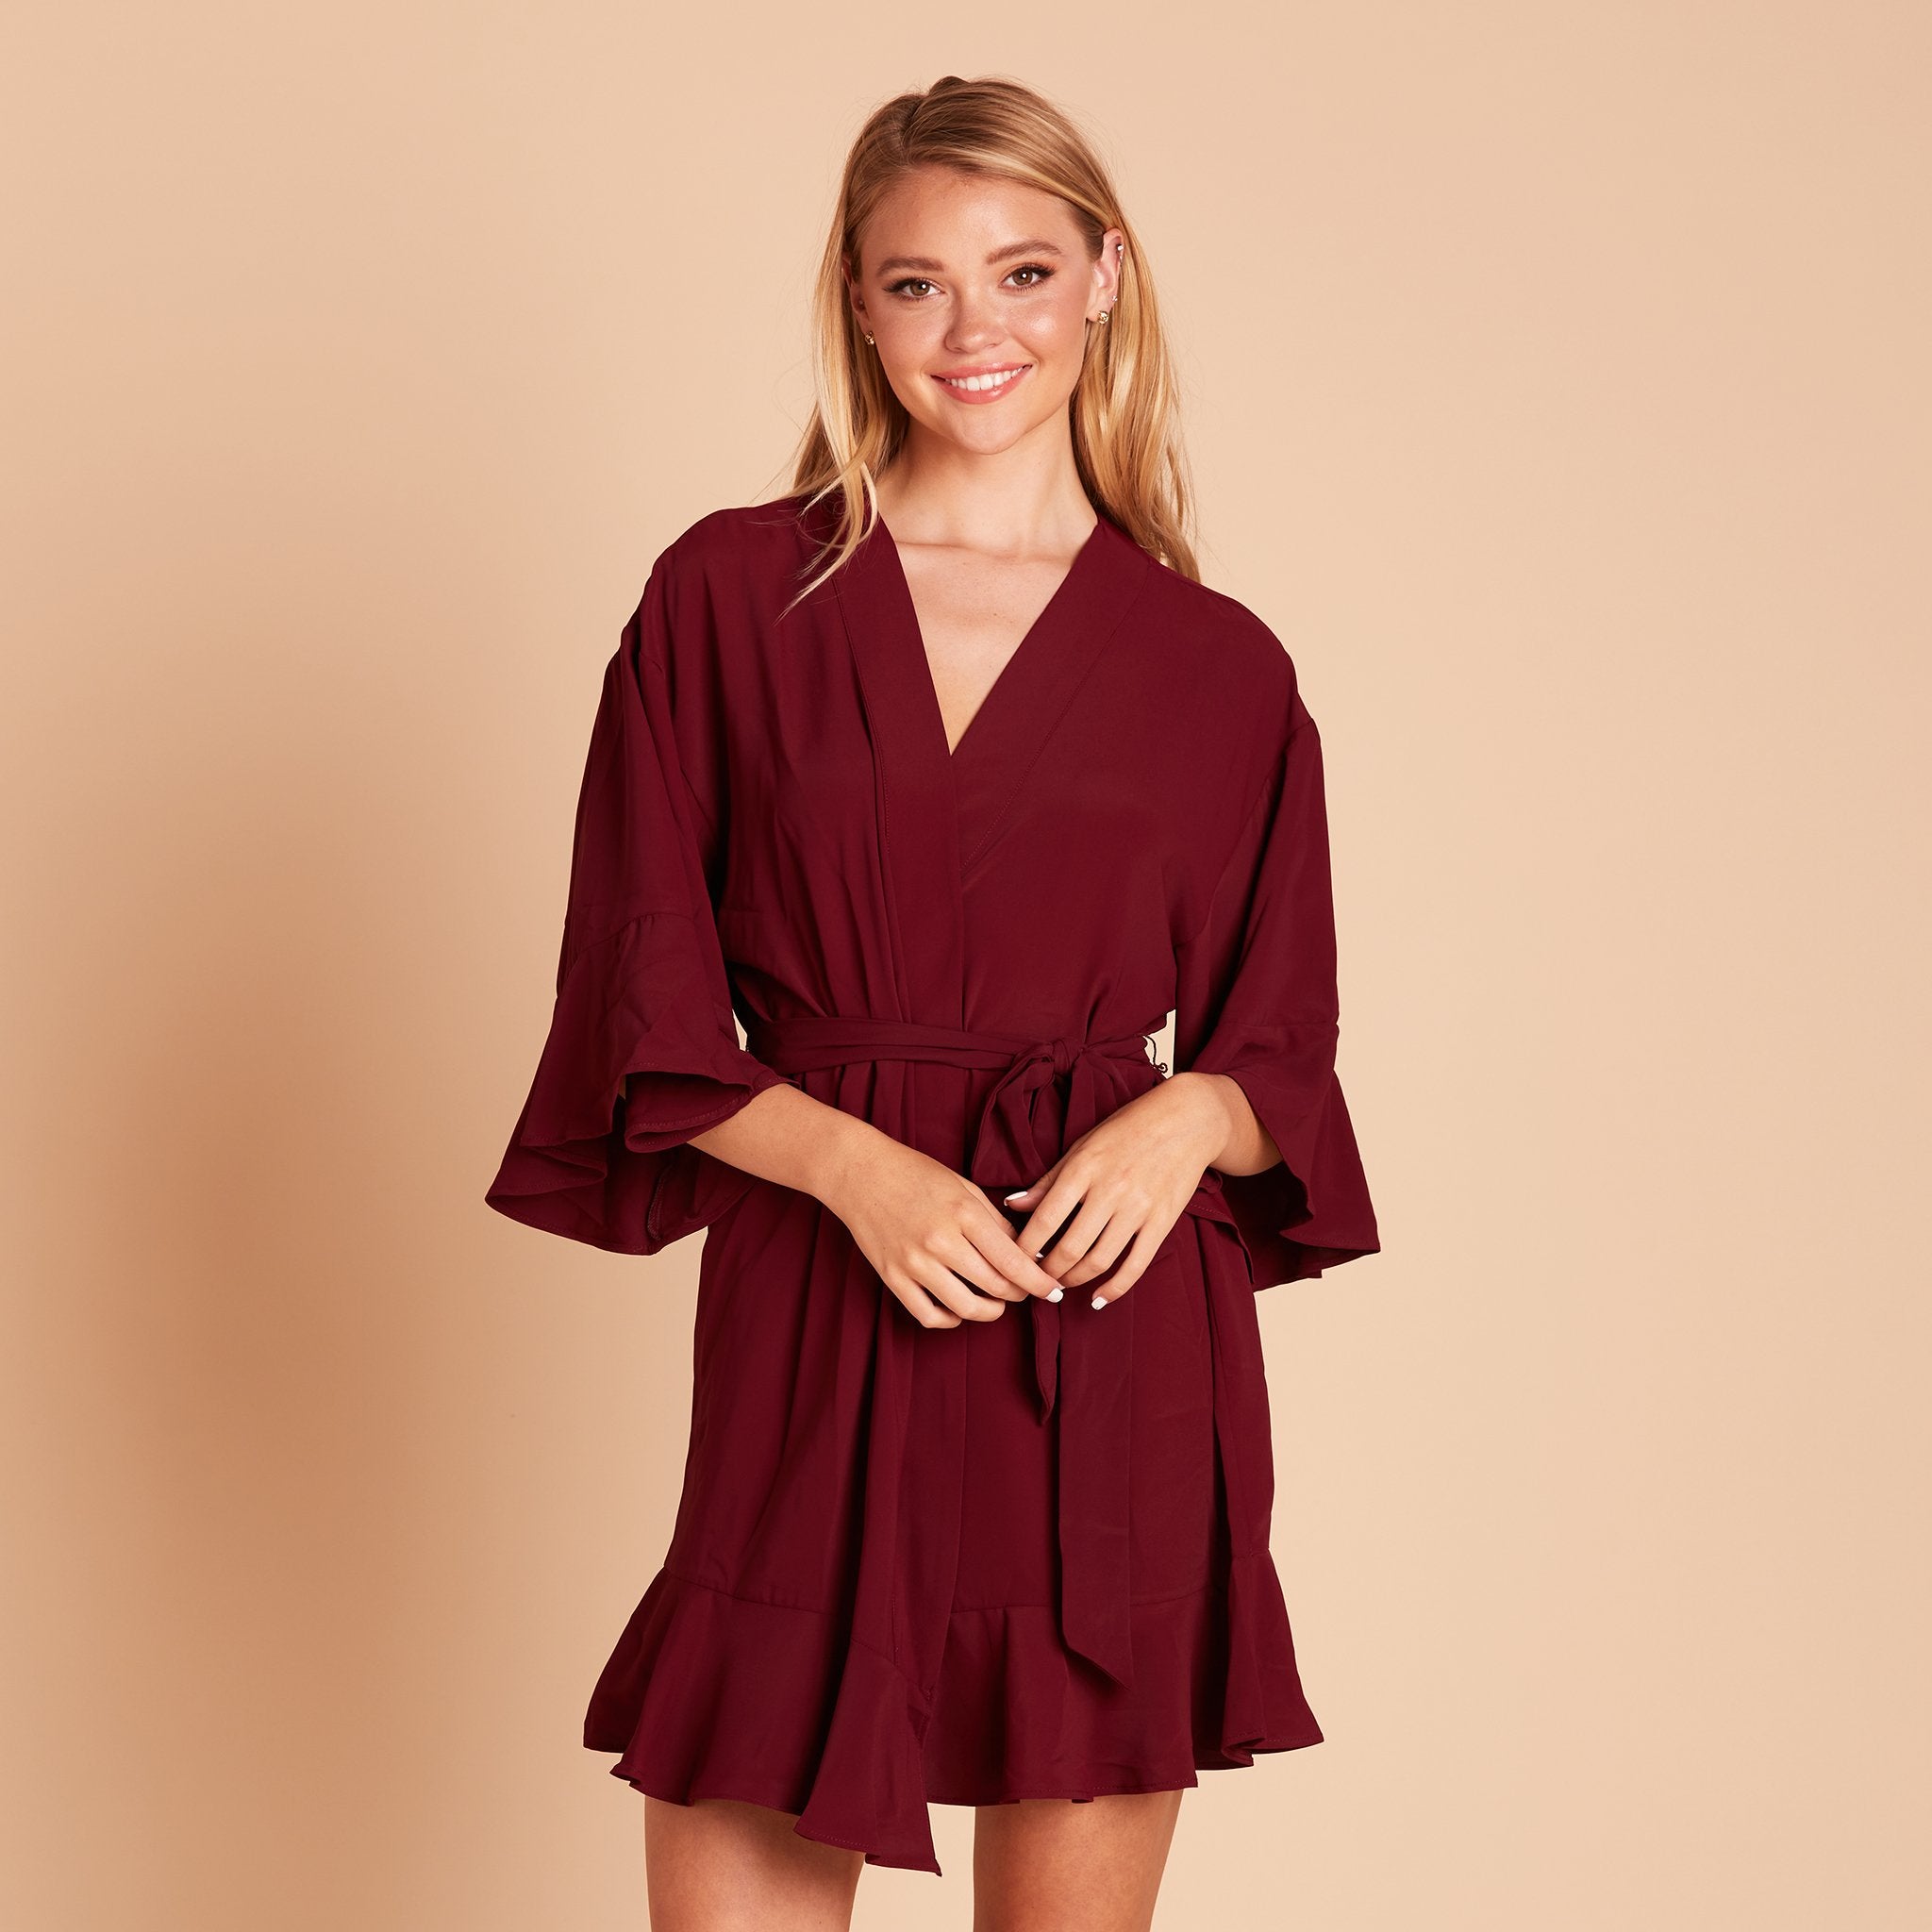 Kenny Ruffle Robe in cabernet burgundy by Birdy Grey, front view